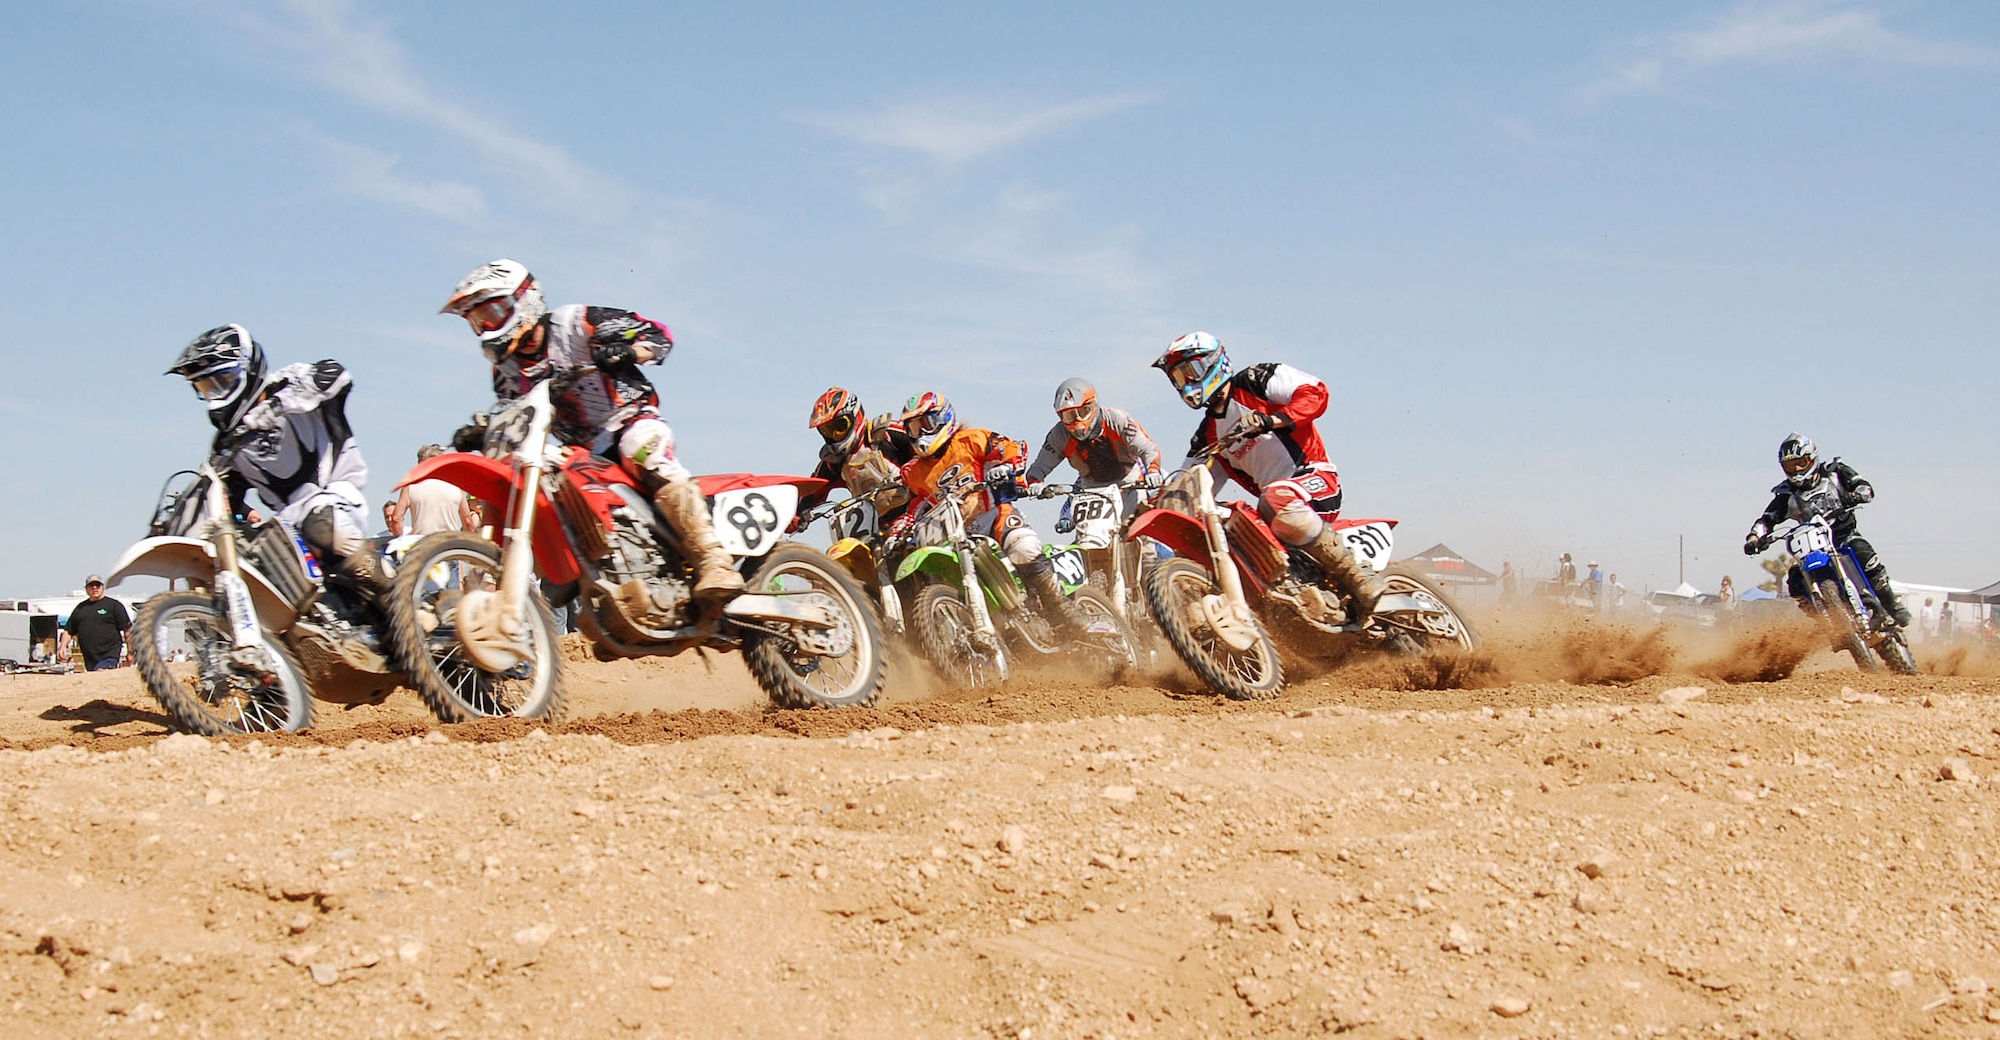 Motocross enthusiasts race at Edwards' dirt track during the Dunestown Motocross race April 29. The Desert Wheels and California Racing Clubs hosted the event. (Photo by Senior Airman Jason Hernandez)